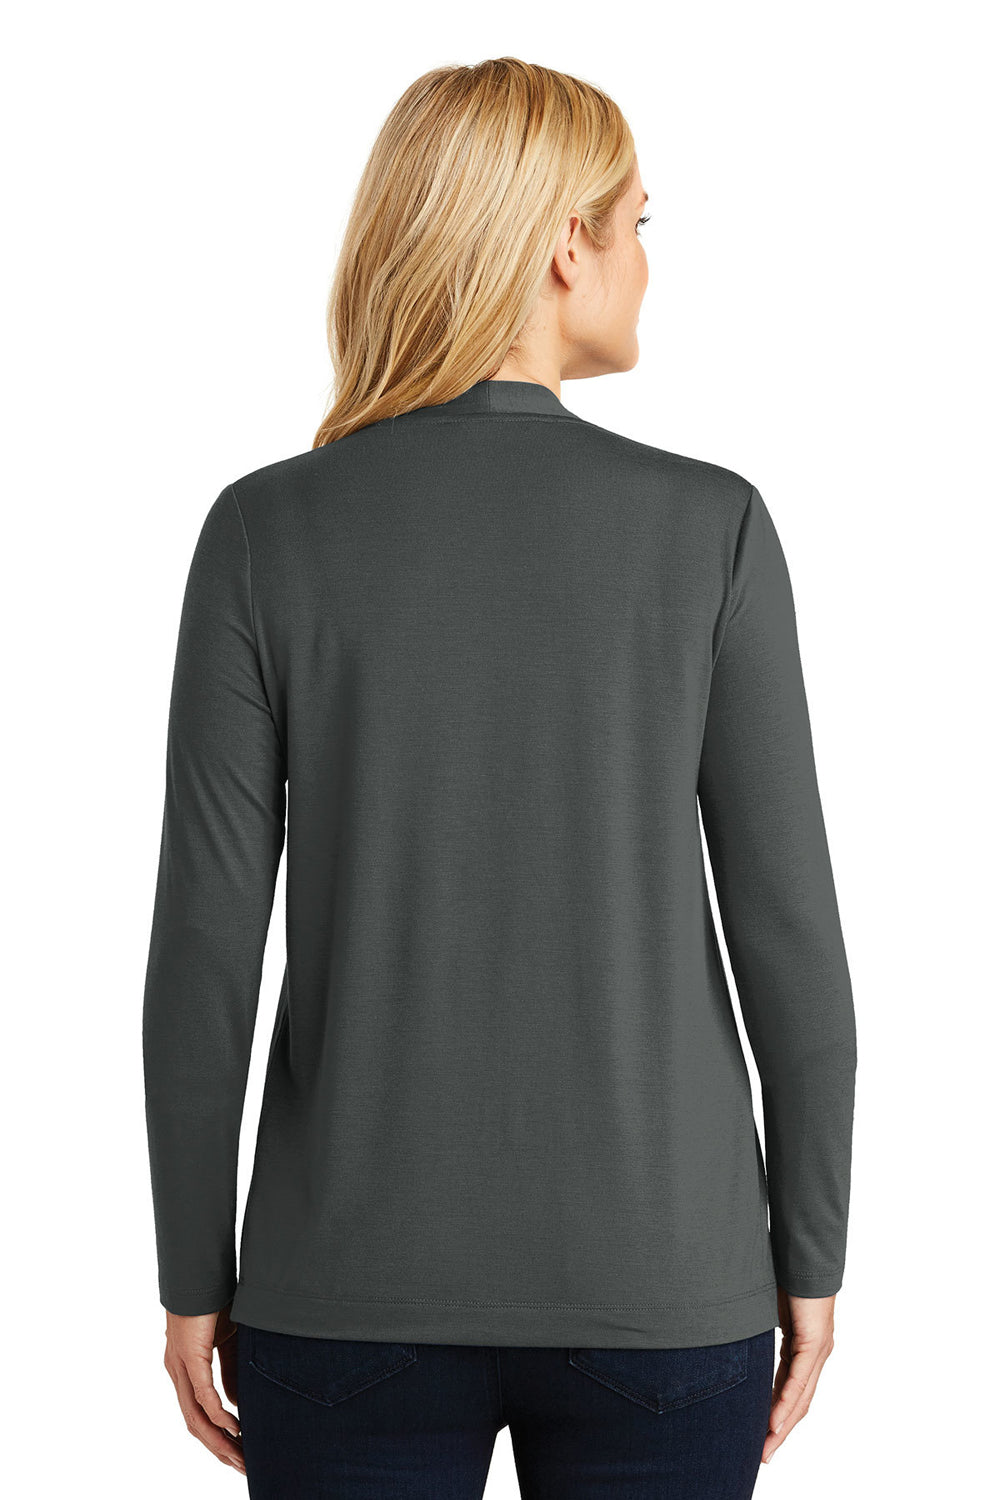 Port Authority L5430 Womens Concept Long Sleeve Cardigan Sweater Smoke Grey Back